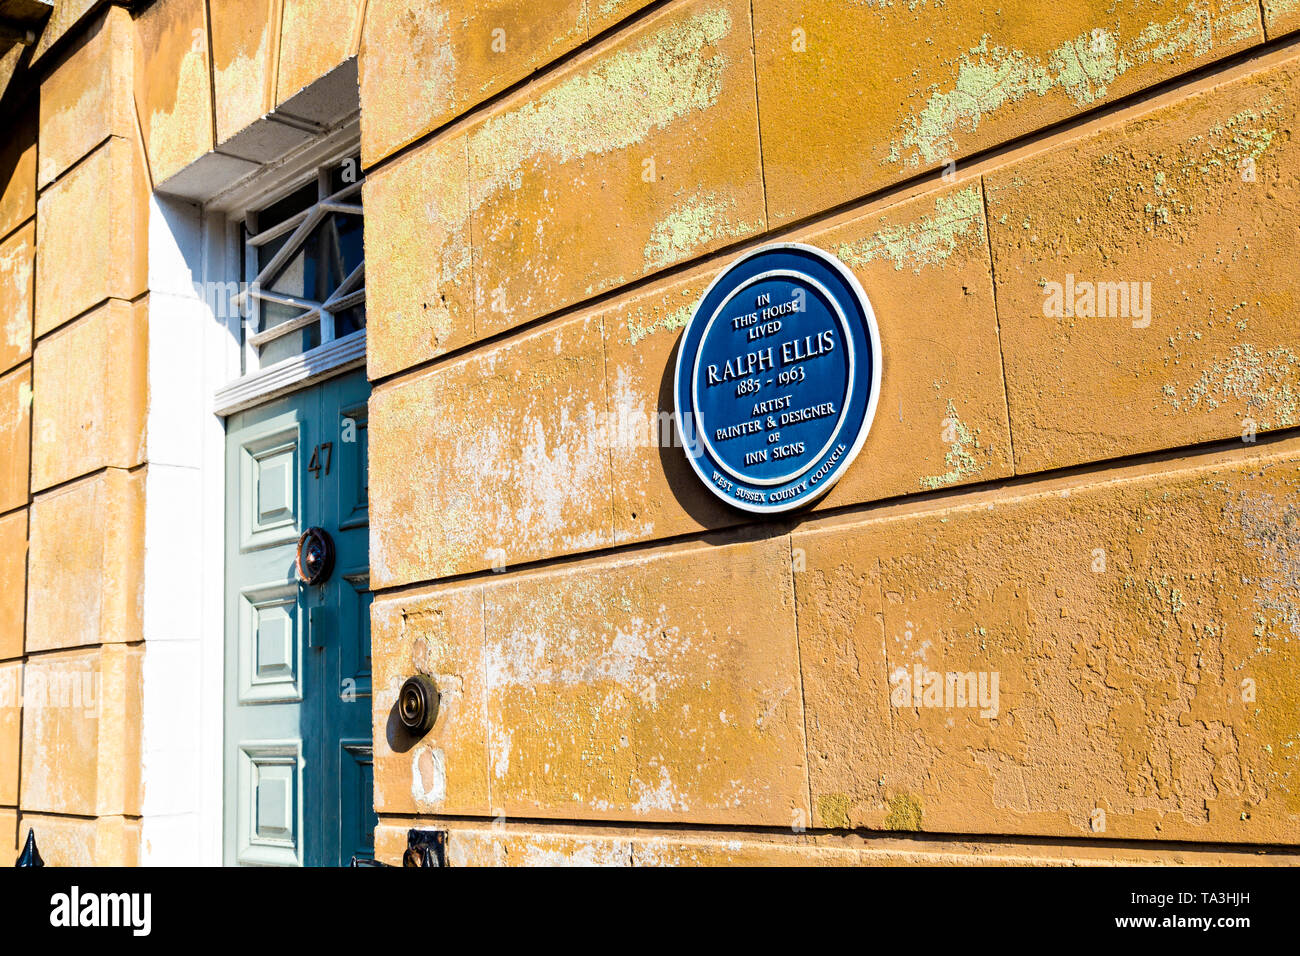 Blue Plaque for Ralph Ellis, artist, painter and designer, who lived in this house, Maltravers Street, Arundel, UK Stock Photo